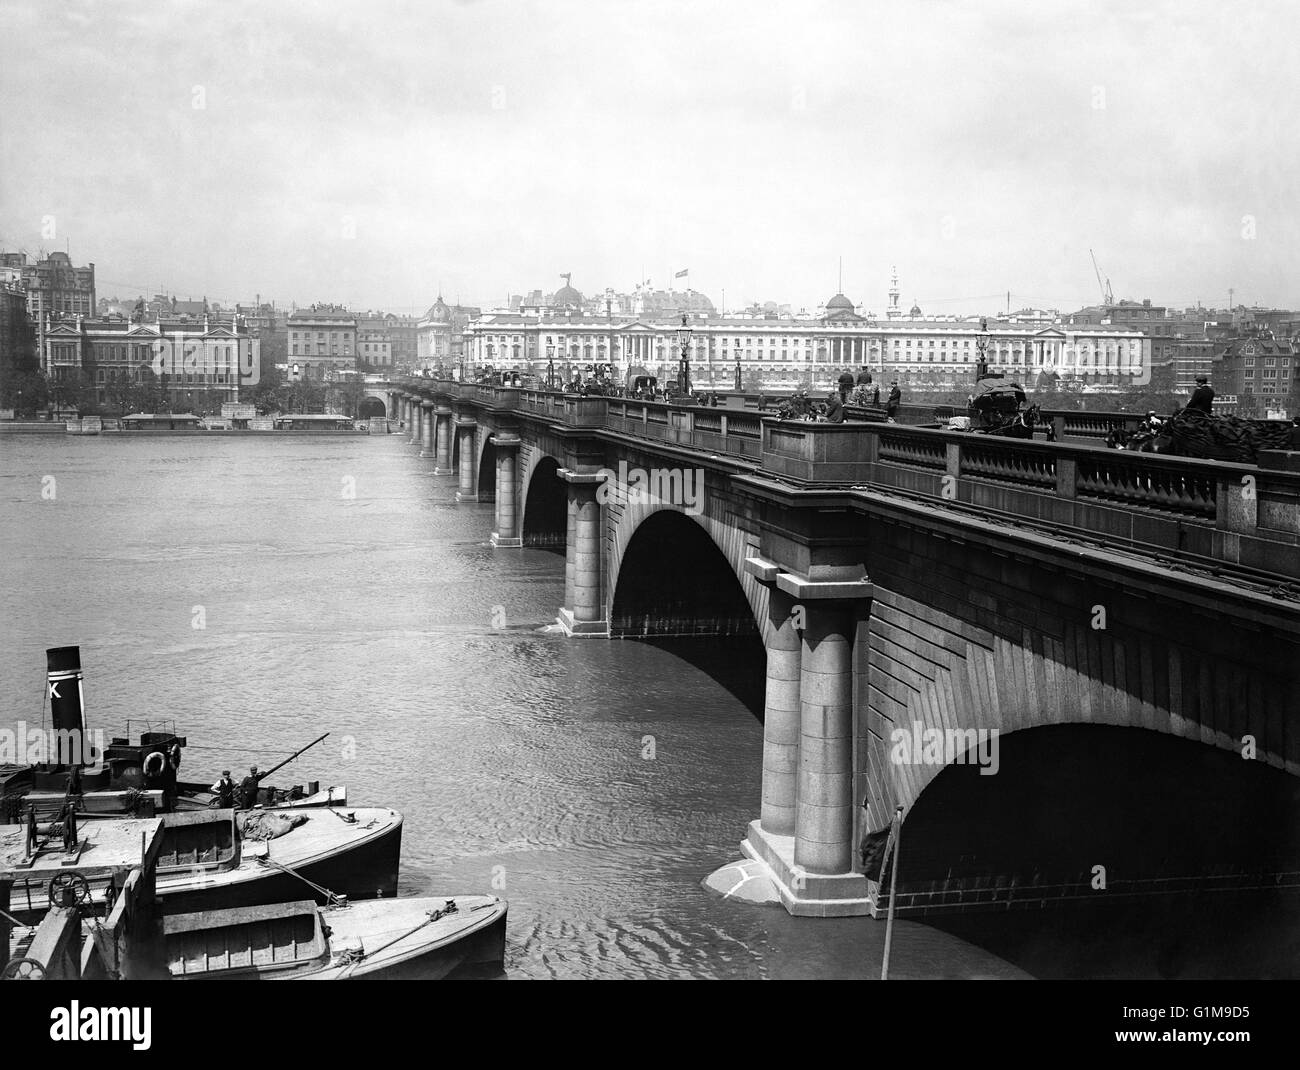 Old Waterloo Bridge, which was designed by John Rennie and opened in 1817. The bridge was finally demolished when the new Waterloo bridge opened in 1945. ... British Transport - Road - Bridges - Waterloo Bridge - London - 1911 ... 01-01-1911 ... London ... UK ... Photo credit should read: PA/Unique Reference No. 1634023 ... Stock Photo